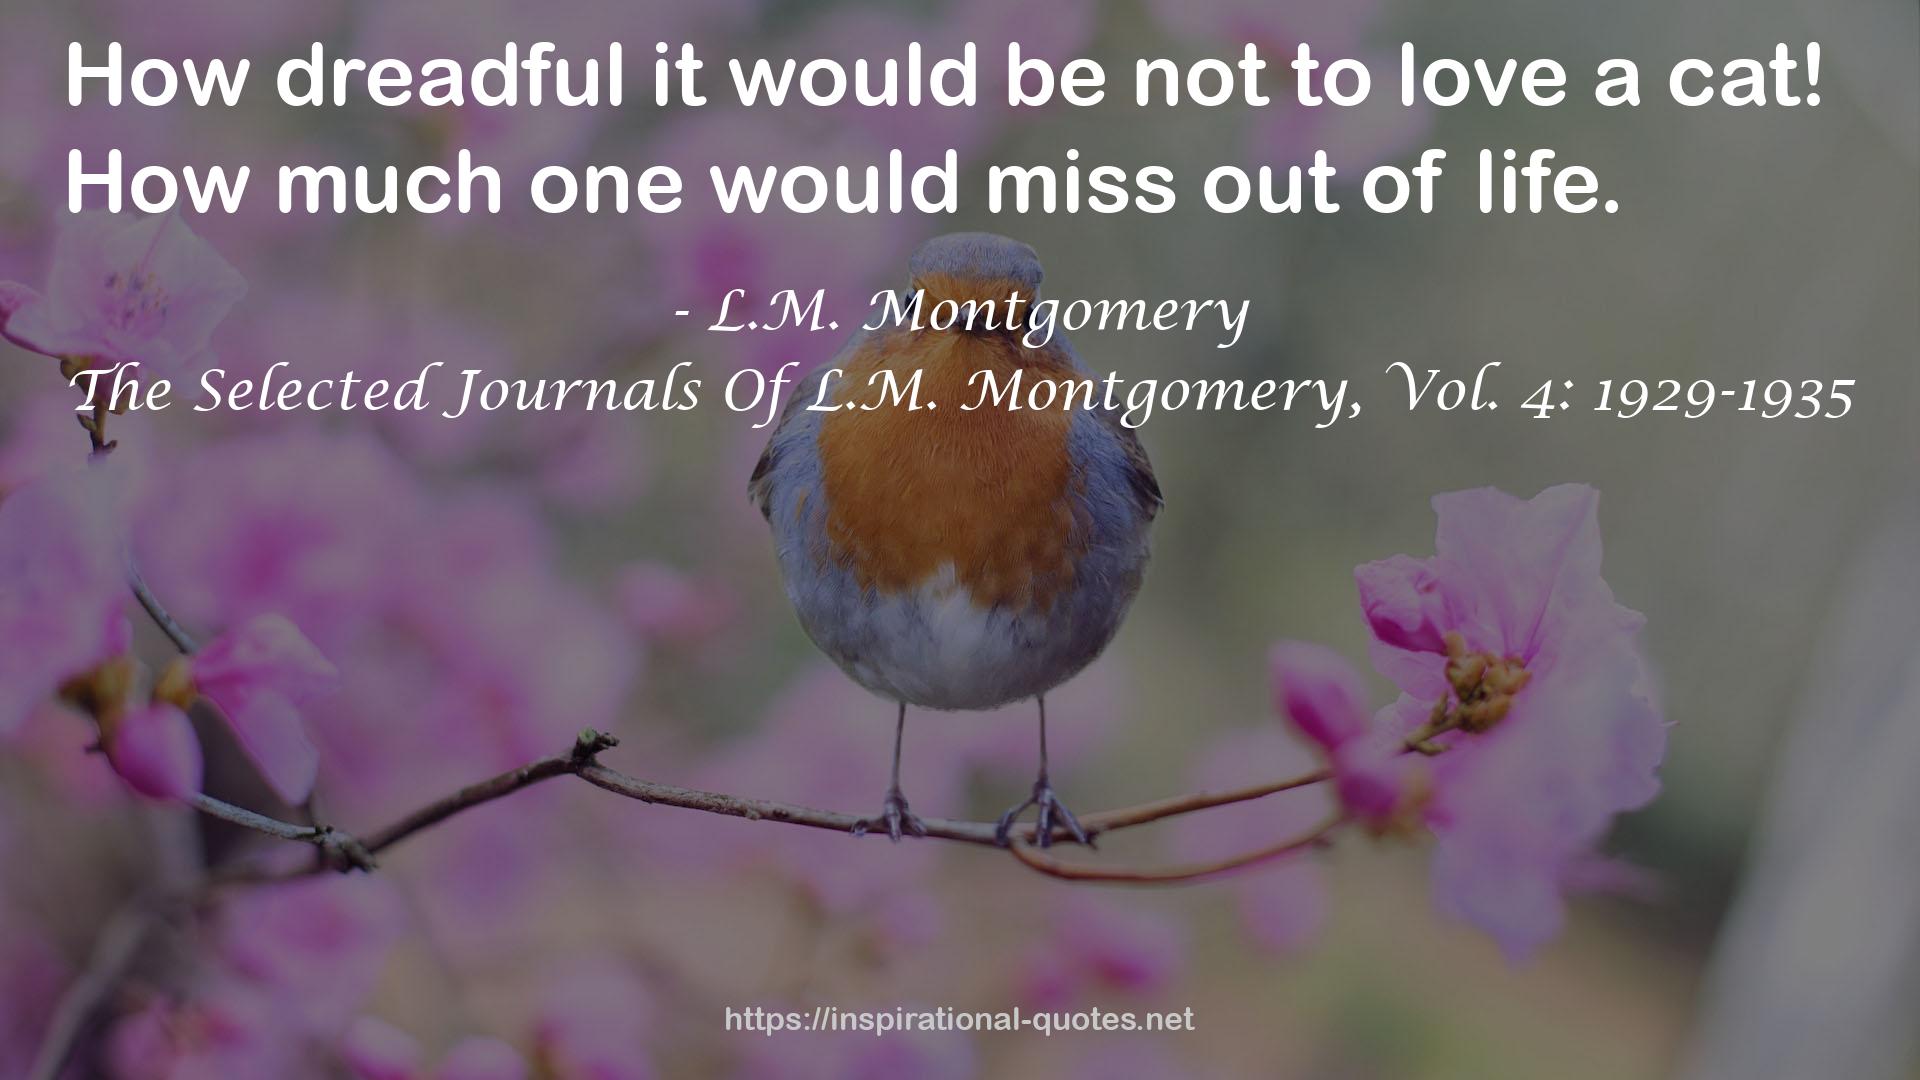 The Selected Journals Of L.M. Montgomery, Vol. 4: 1929-1935 QUOTES